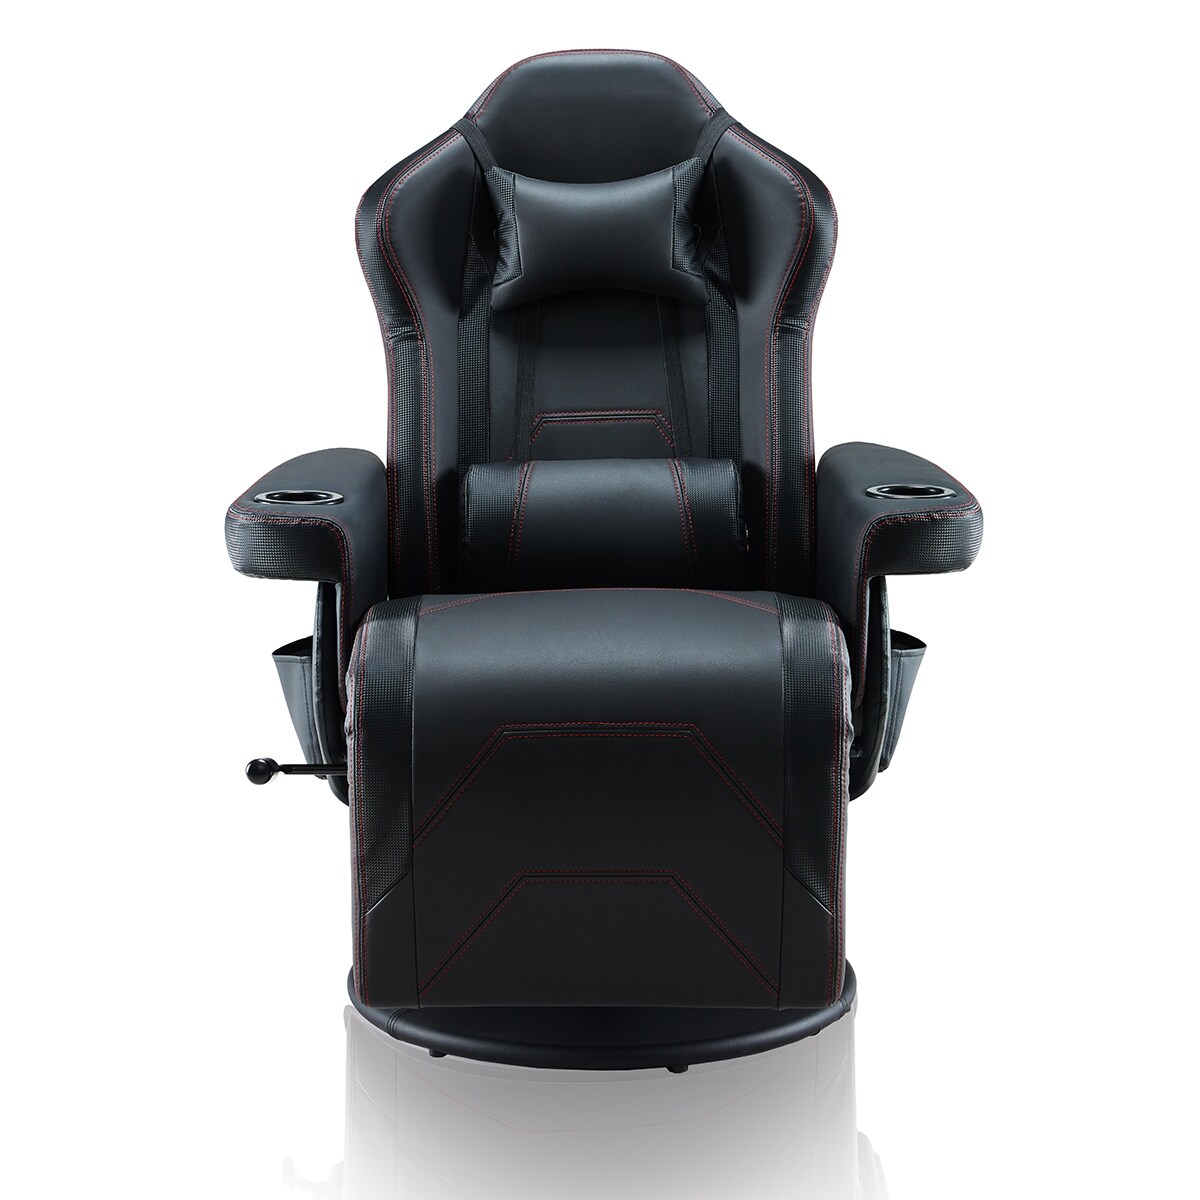 https://ak1.ostkcdn.com/images/products/is/images/direct/b3072d2c88ace1b6ae3829d84e76842dbc380ed1/Recliner-Gaming-Chair%2CAdjustable-headrest%2Clumbar-support.jpg